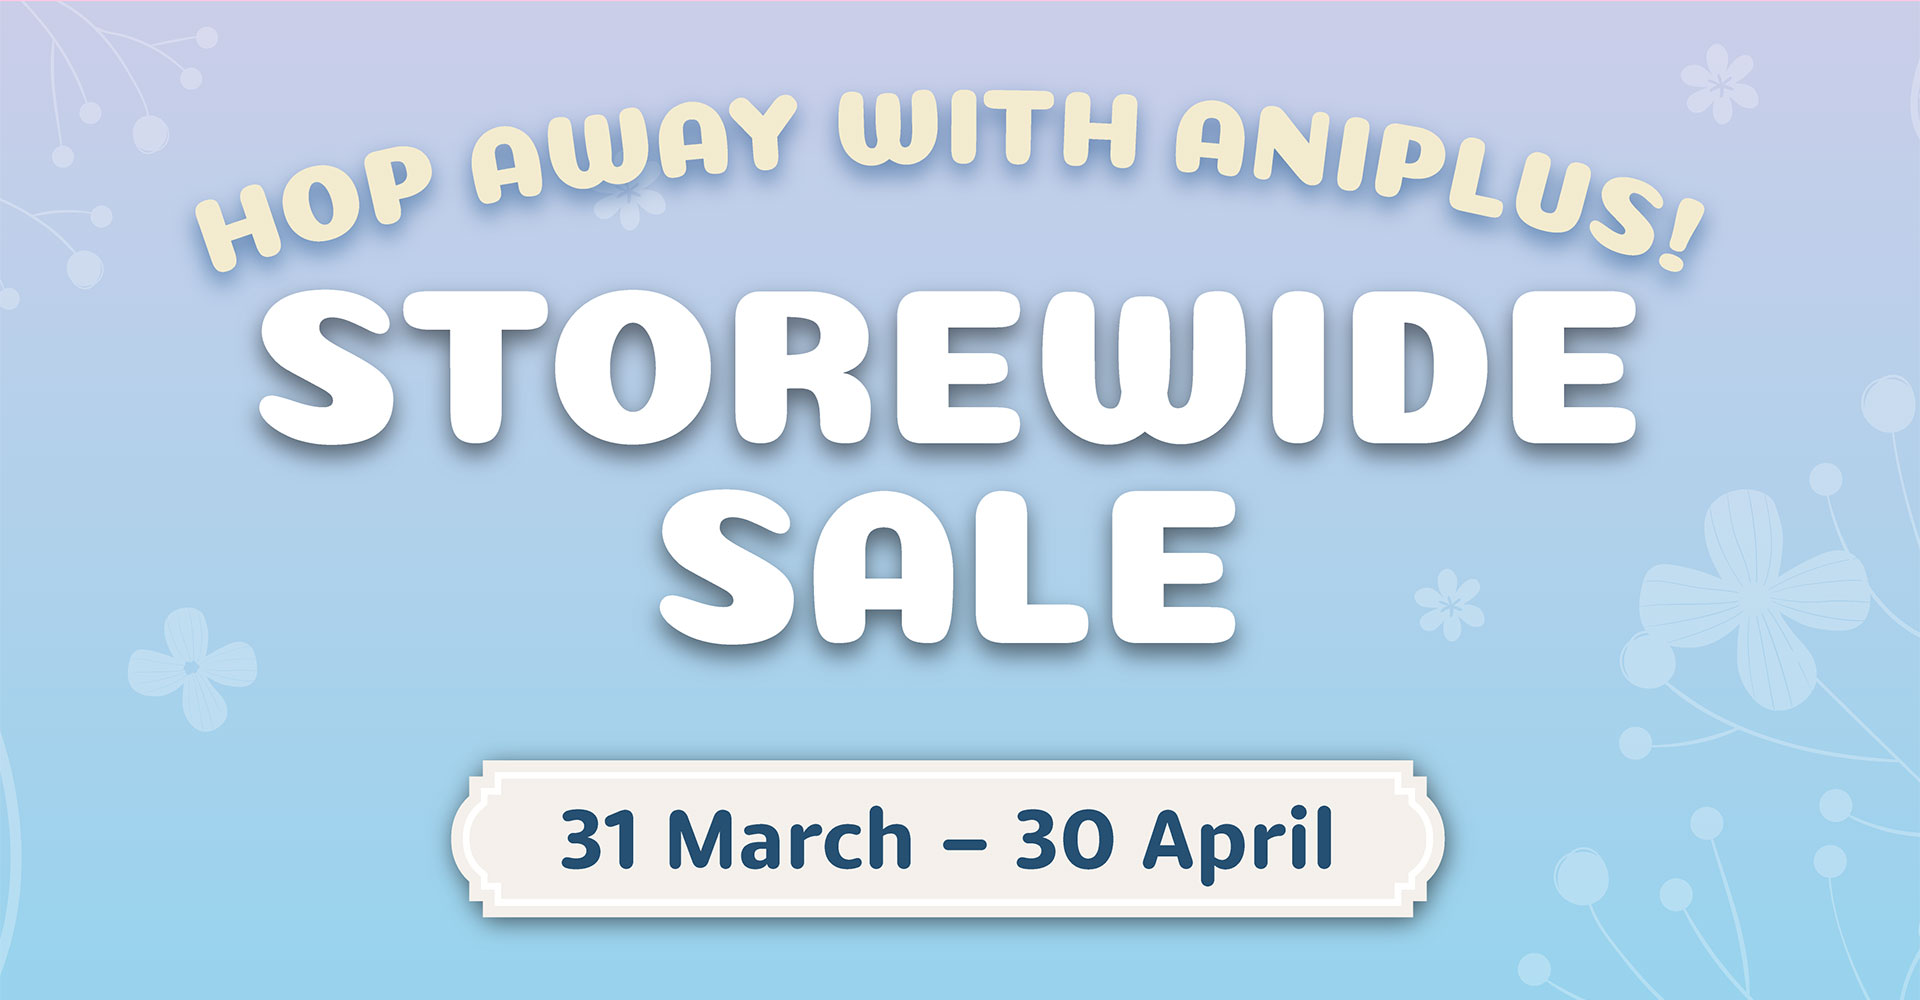 HOP away with ANIPLUS – Storewide Sale Event!